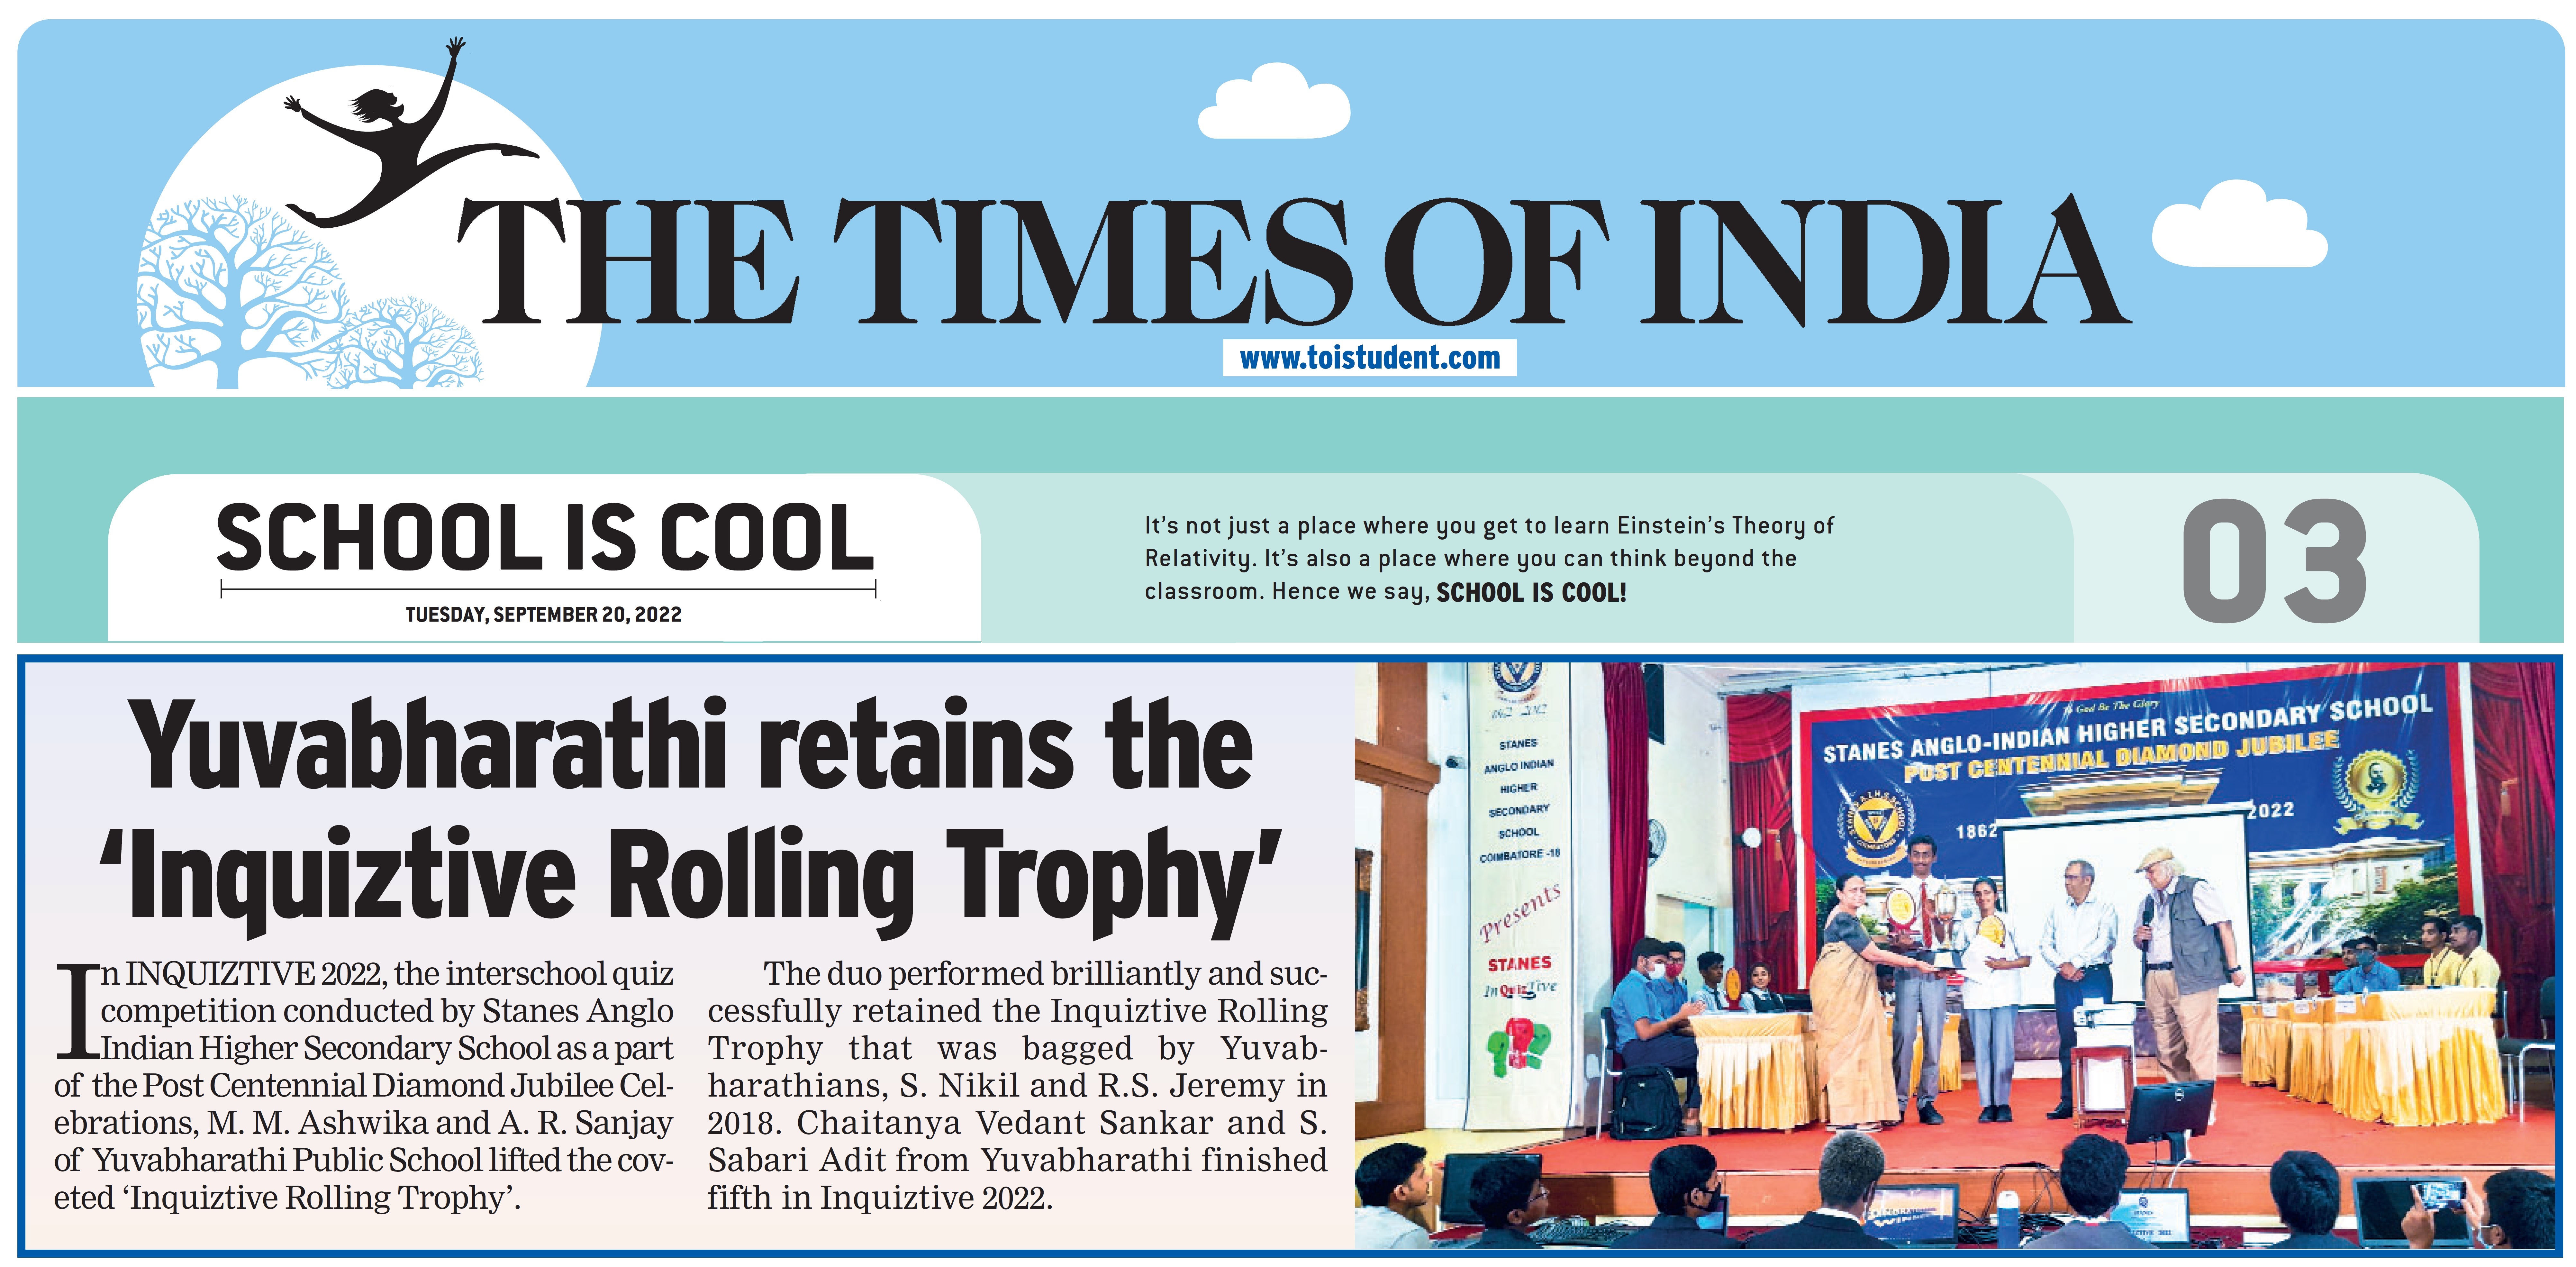 The Times of India Inquiztive Rolling Trophy Article | Top CBSE School - Yuvabharathi Public School.